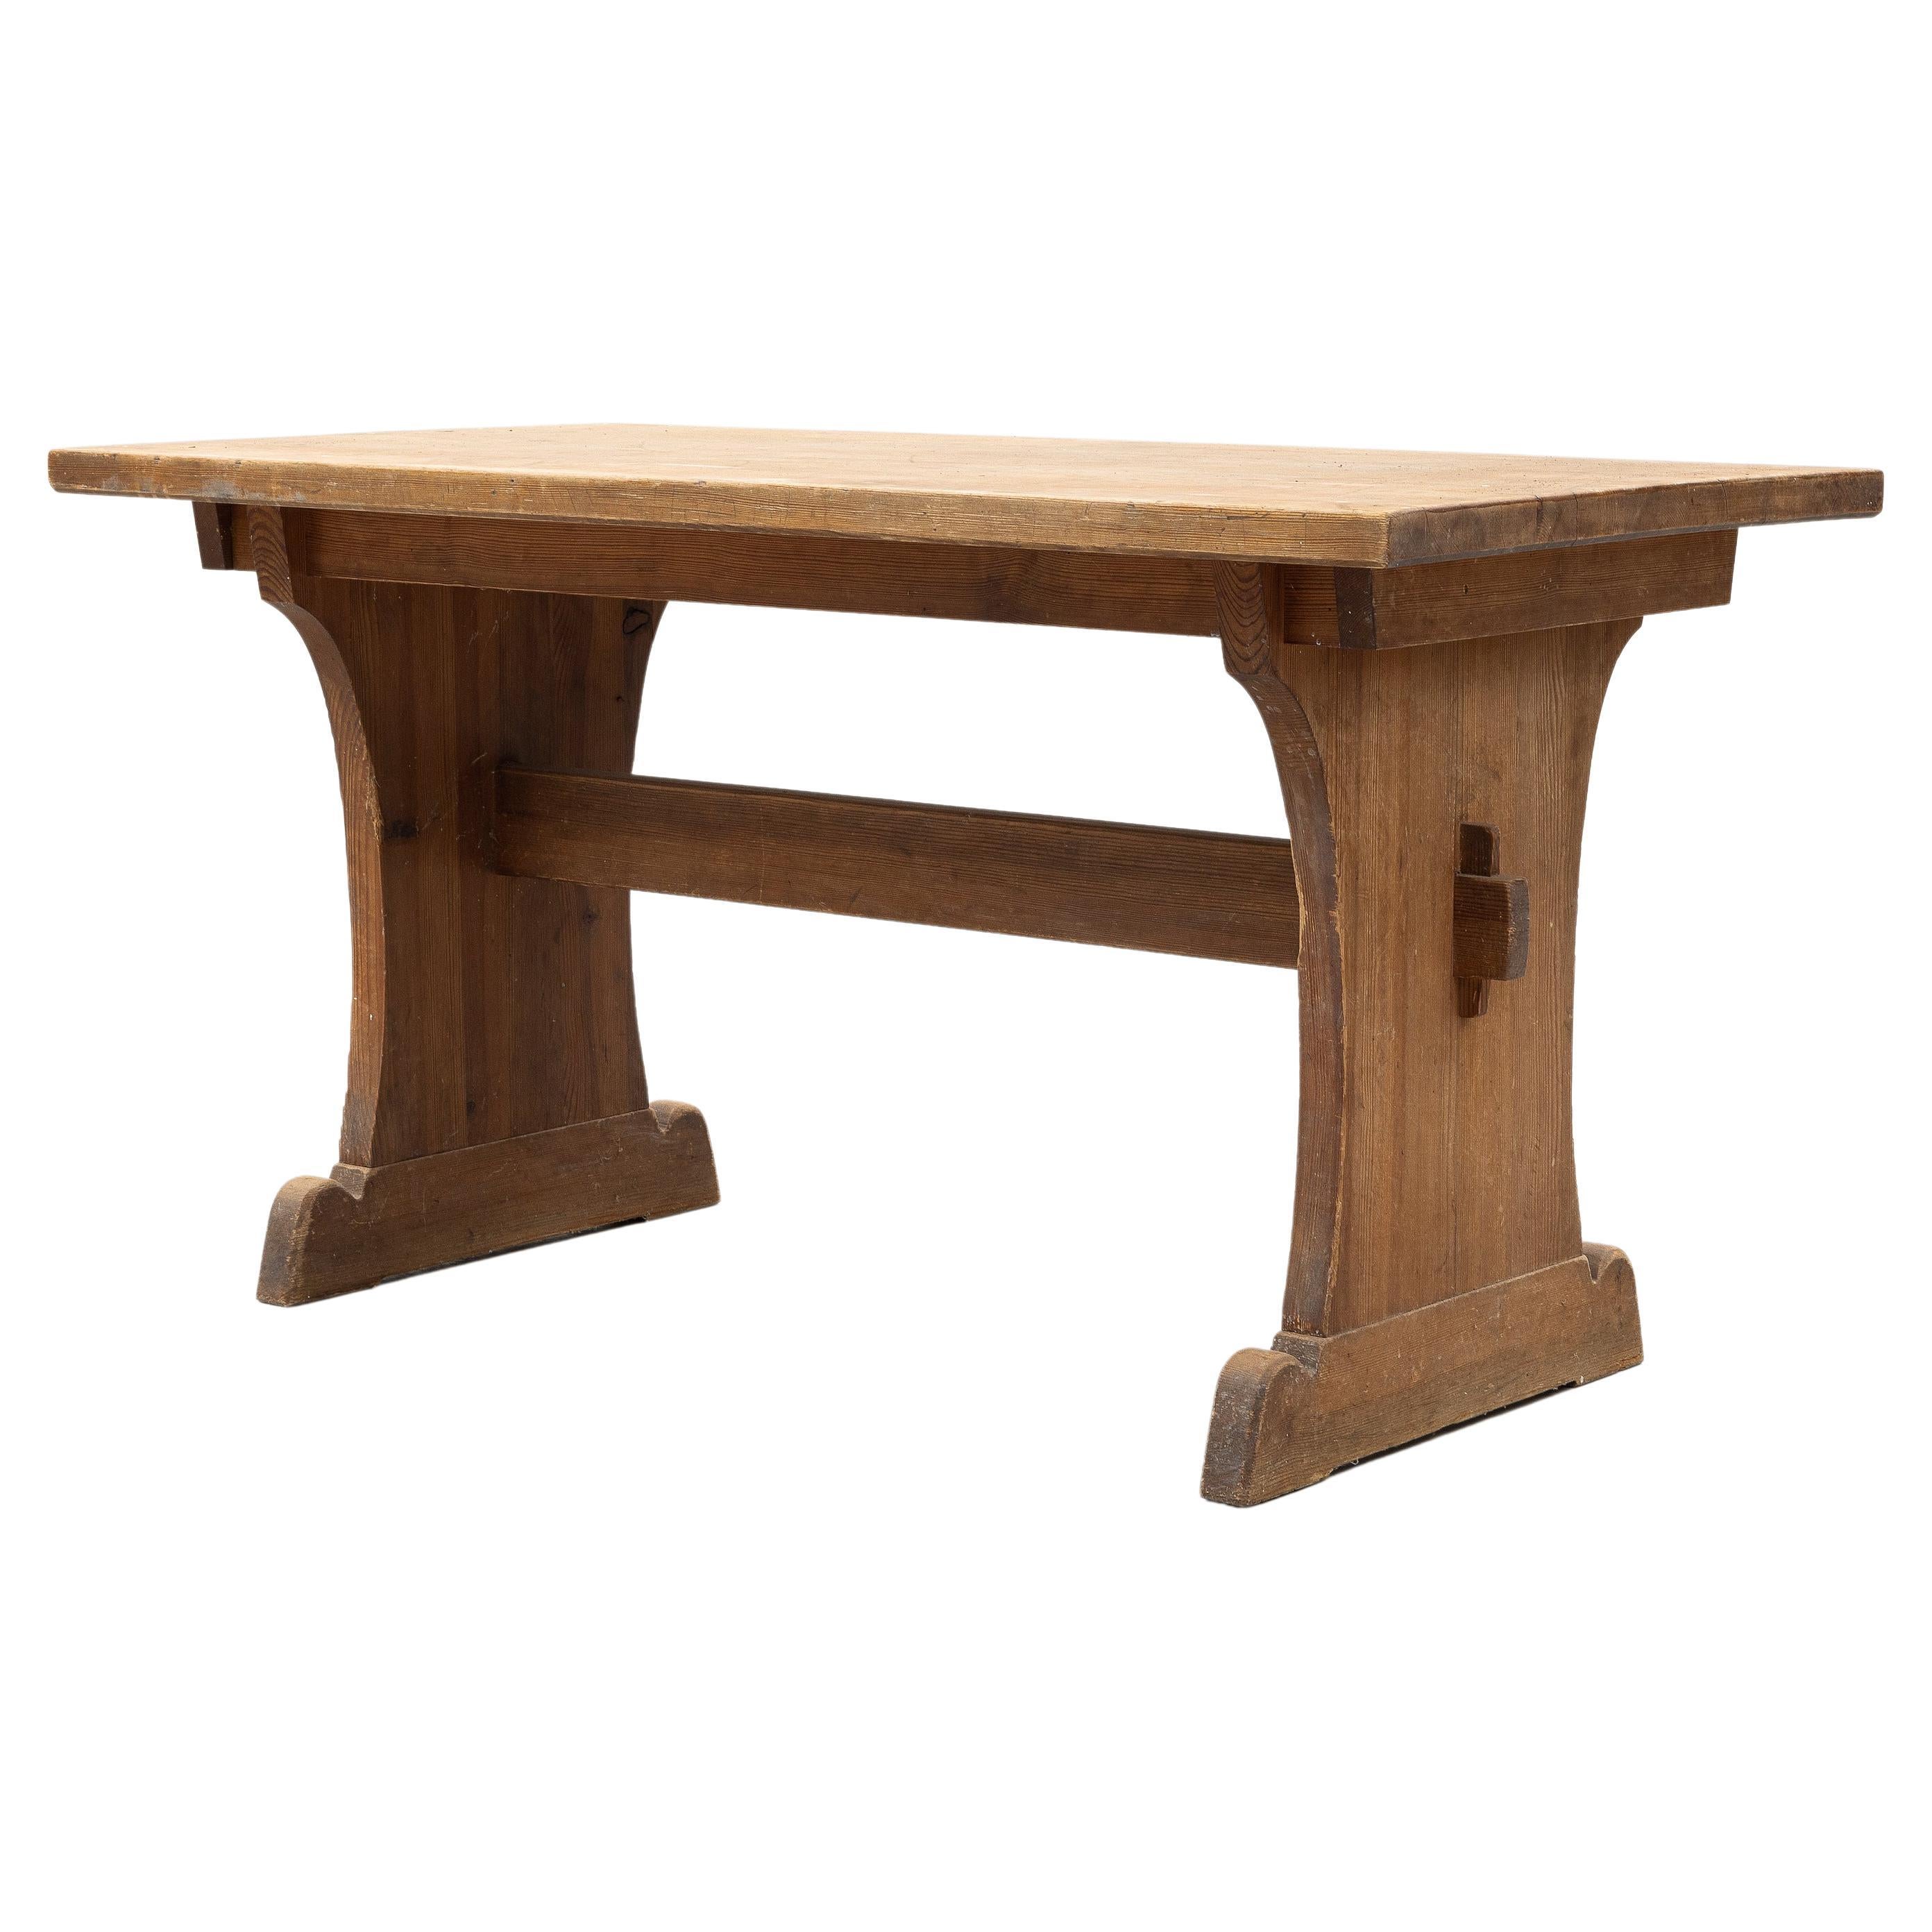 Axel Einar Hjorth "Lovö" Table in Solid Stained Pine Produced for NK, 1930s